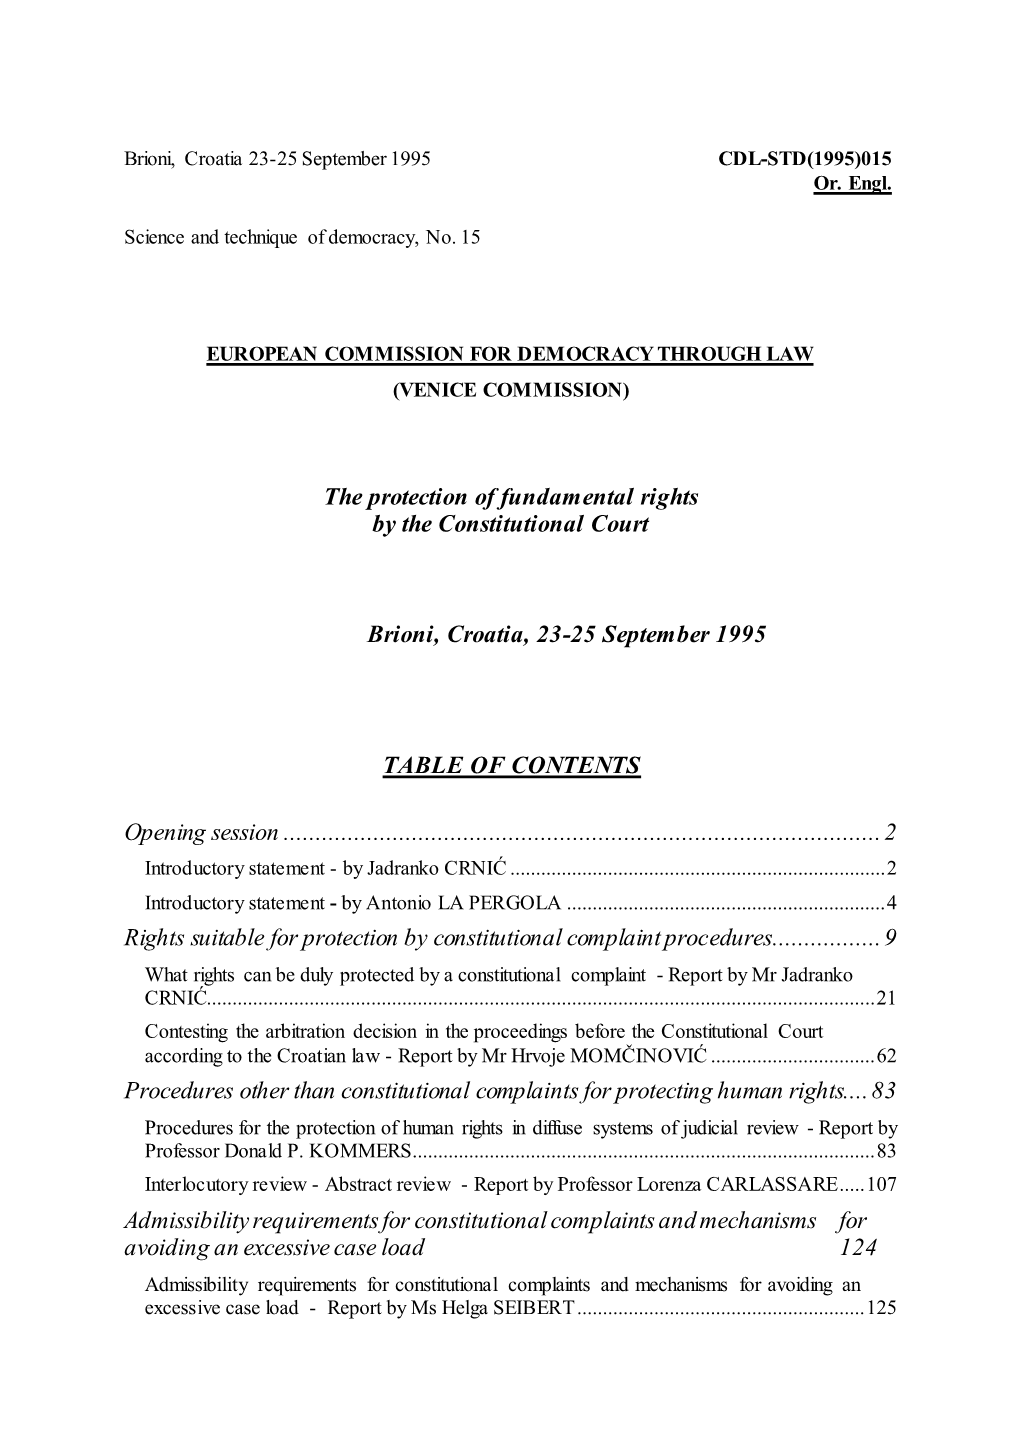 The Protection of Fundamental Rights by the Constitutional Court Brioni, Croatia, 23-25 September 1995 TABLE of CONTENTS Opening